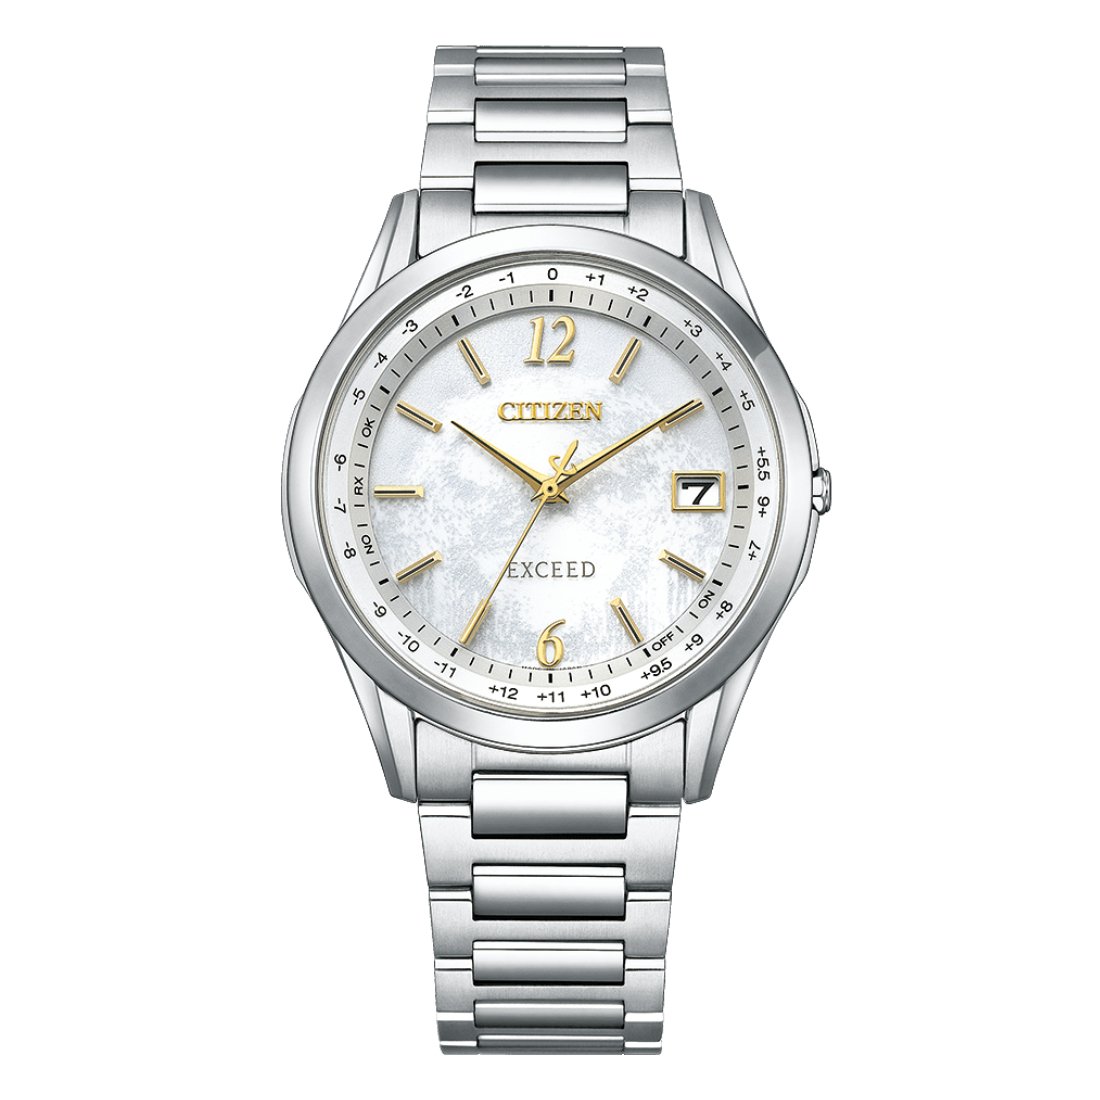 Citizen CB1110-70A Exceed Limited Model White Dial Photovoltaic Eco-Drive Watch -Citizen